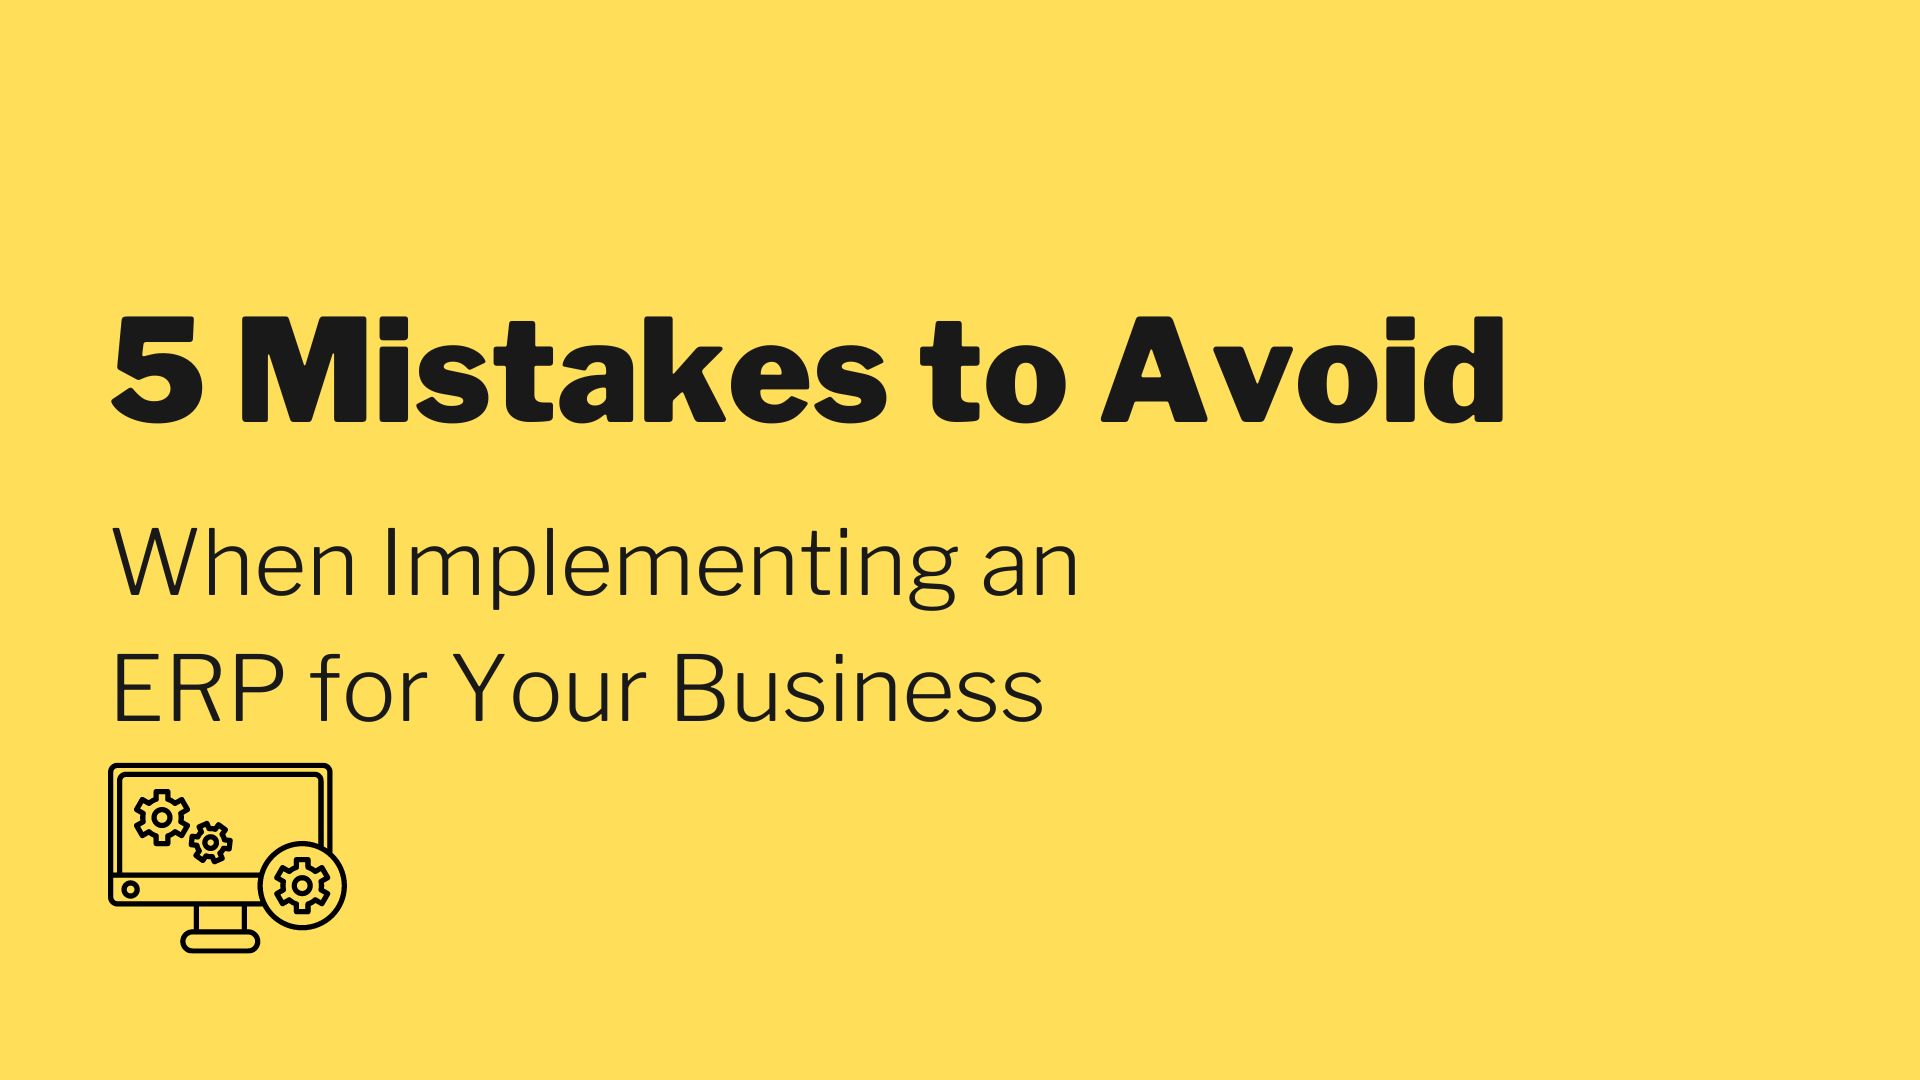 5 Mistakes to Avoid When Implementing an ERP for Your Business